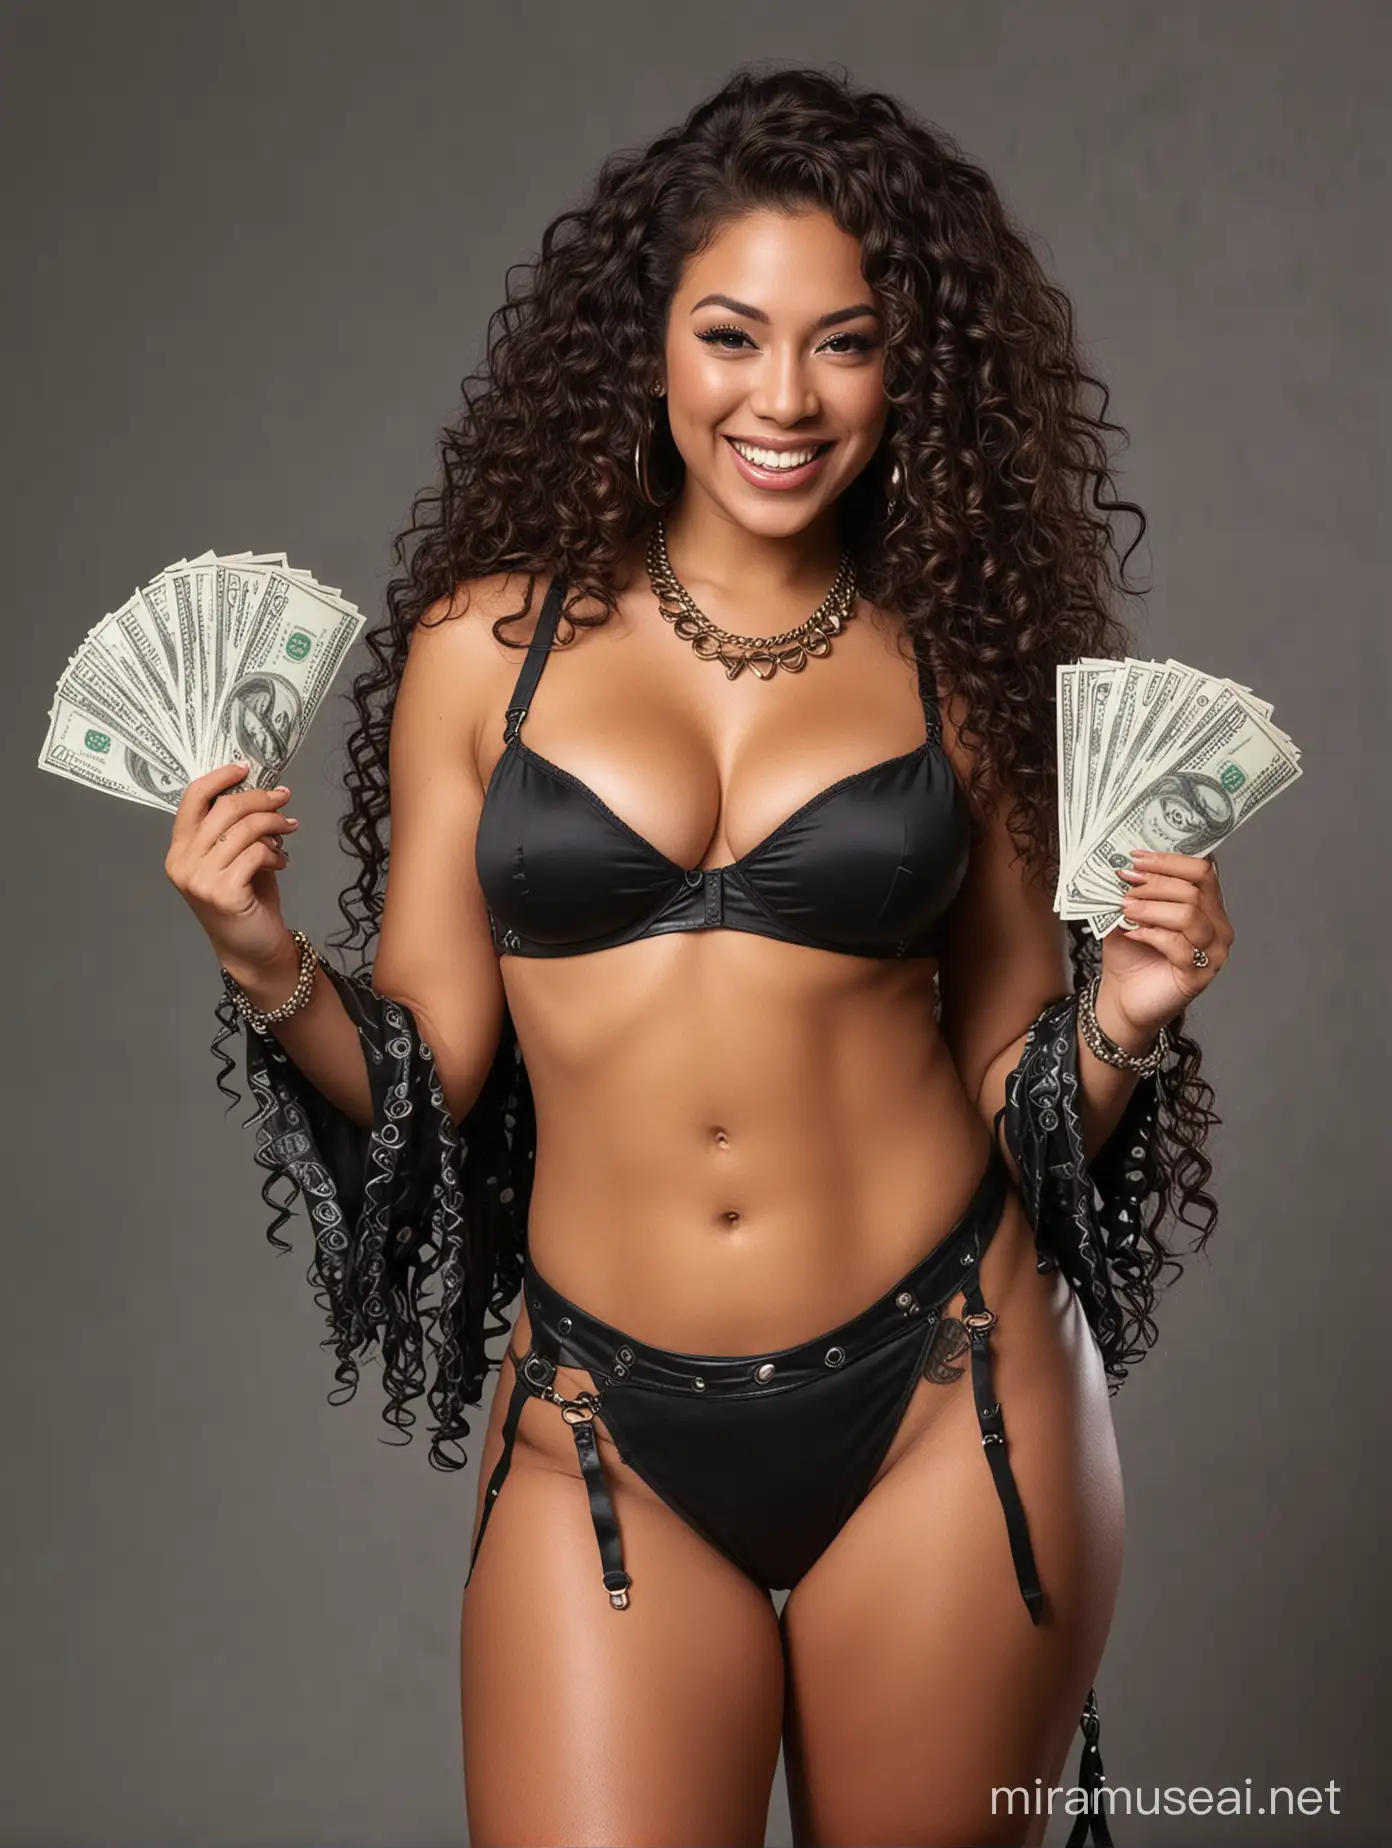 A thick Hawaiian pimp dominatrix with long curly smiles with money in her hands.